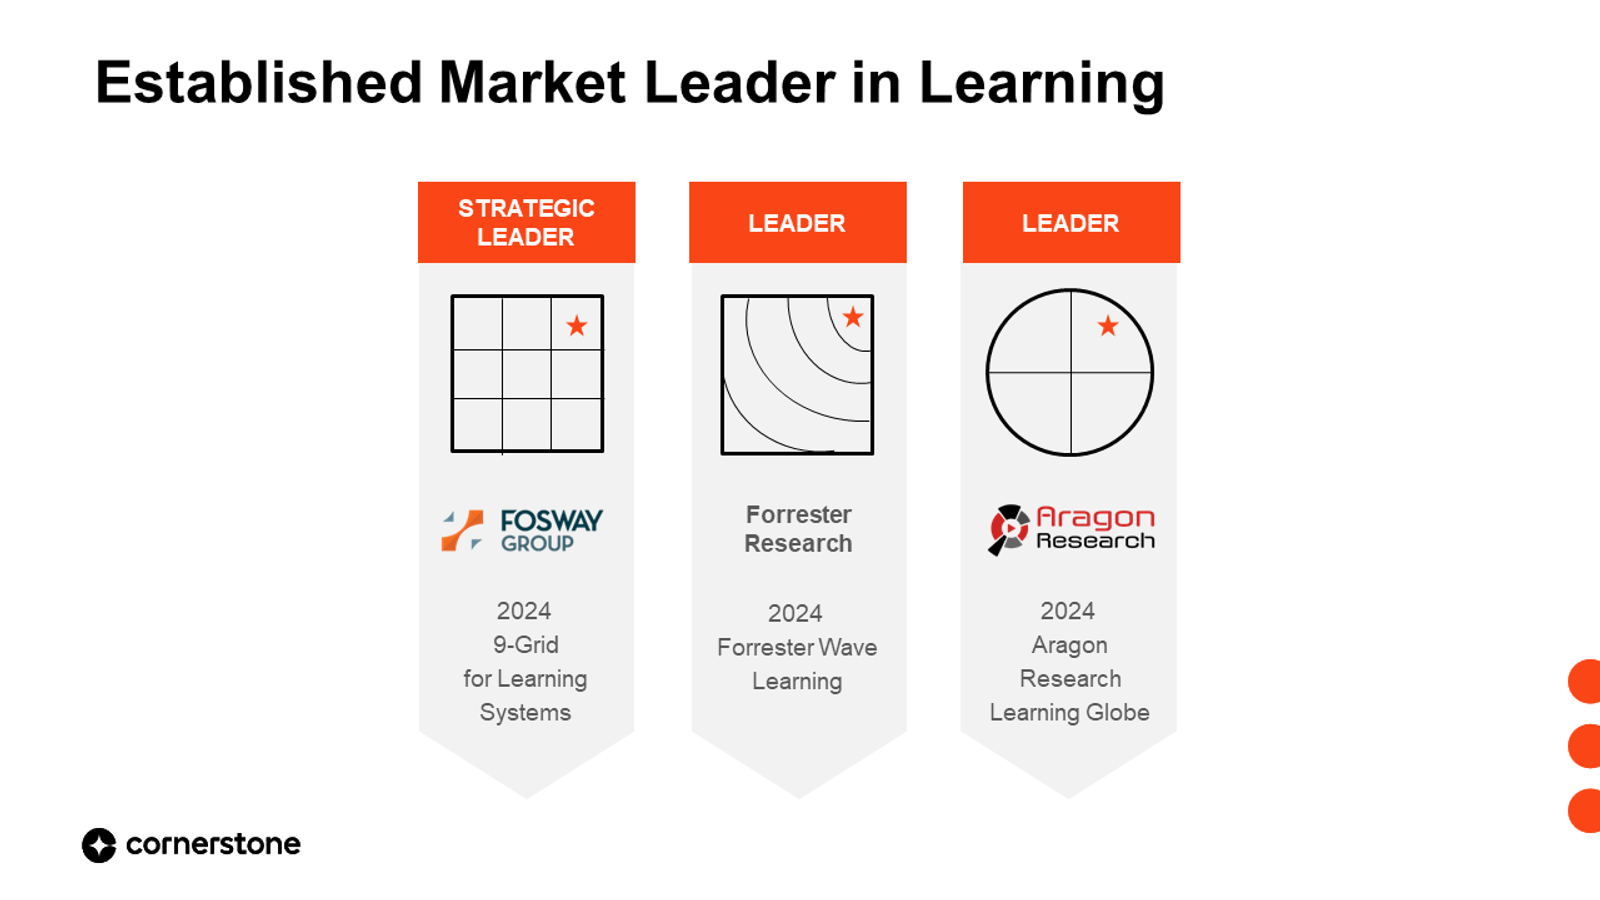 Cornerstone: Leading the way in 2024's learning platforms and systems reports